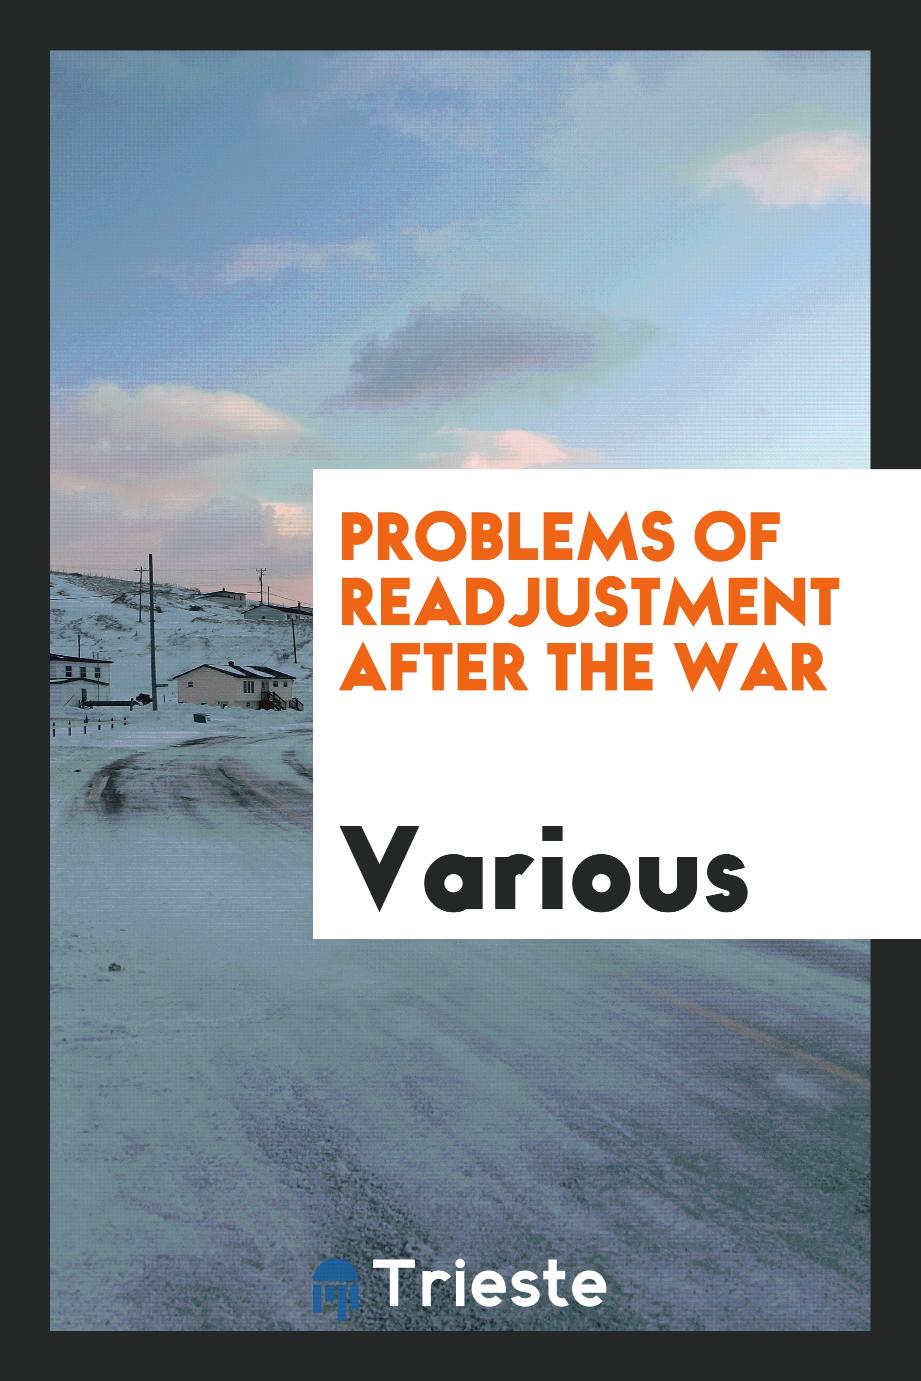 Problems of readjustment after the war